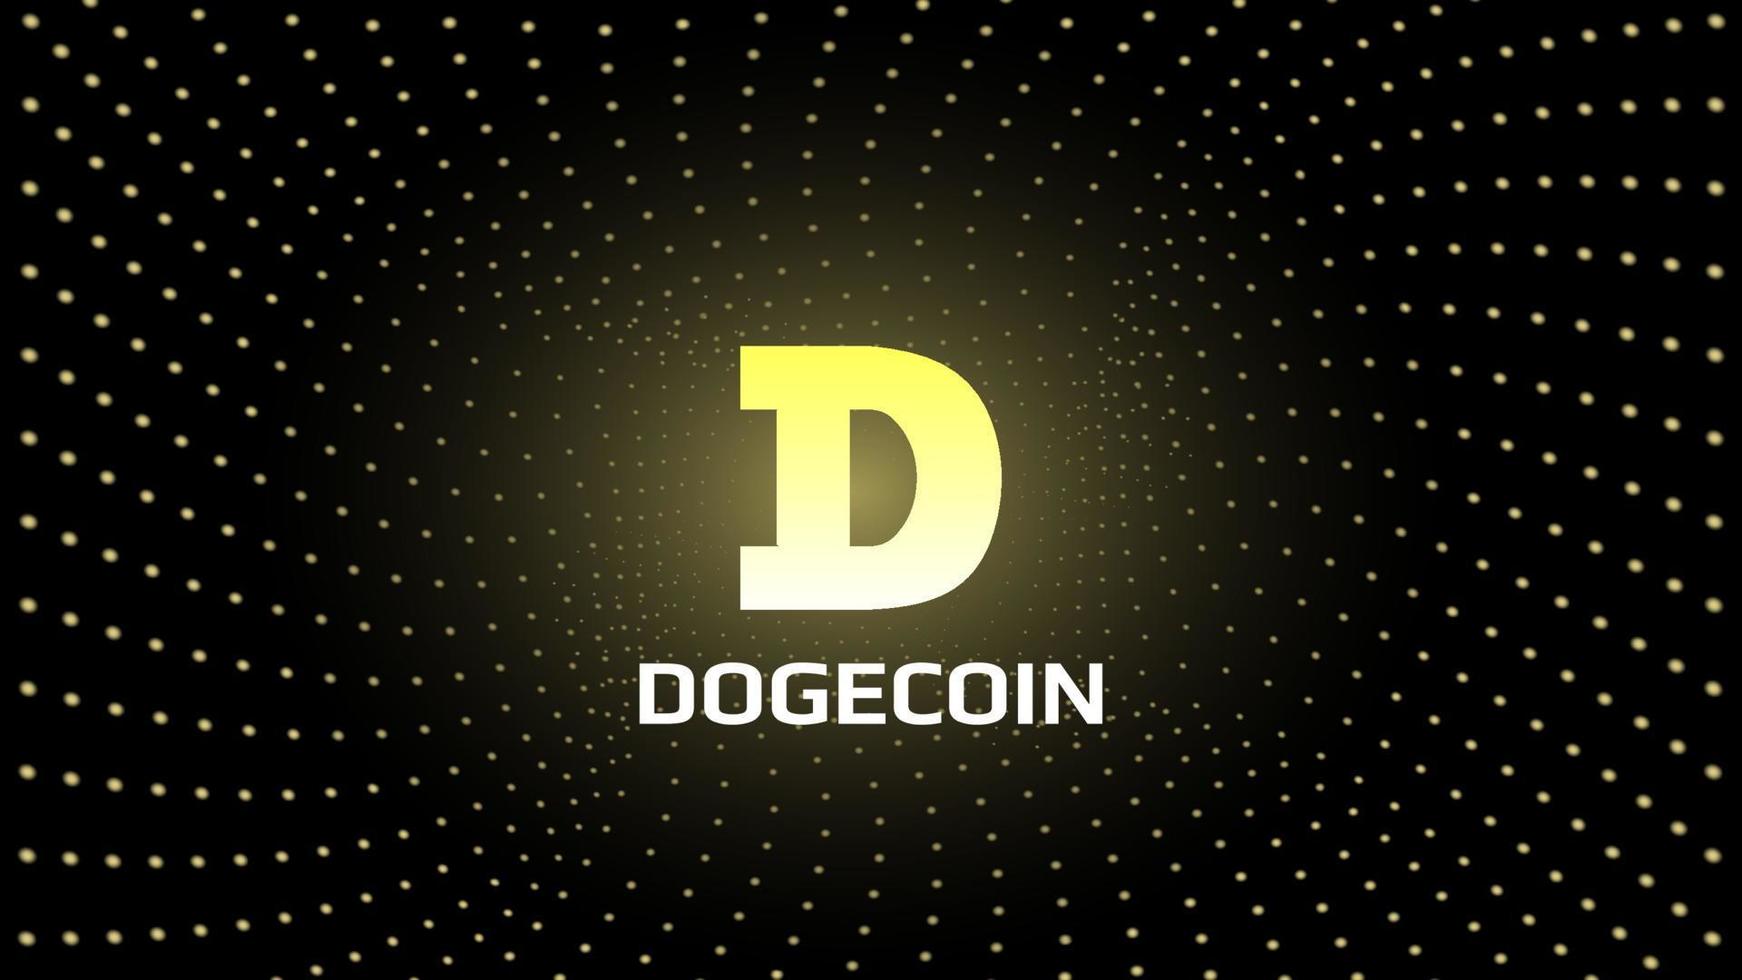 Dogecoin DOGE token symbol cryptocurrency in the center of spiral of glowing yellow dots on dark background. Cryptocurrency logo icon for banner or news. Vector illustration.